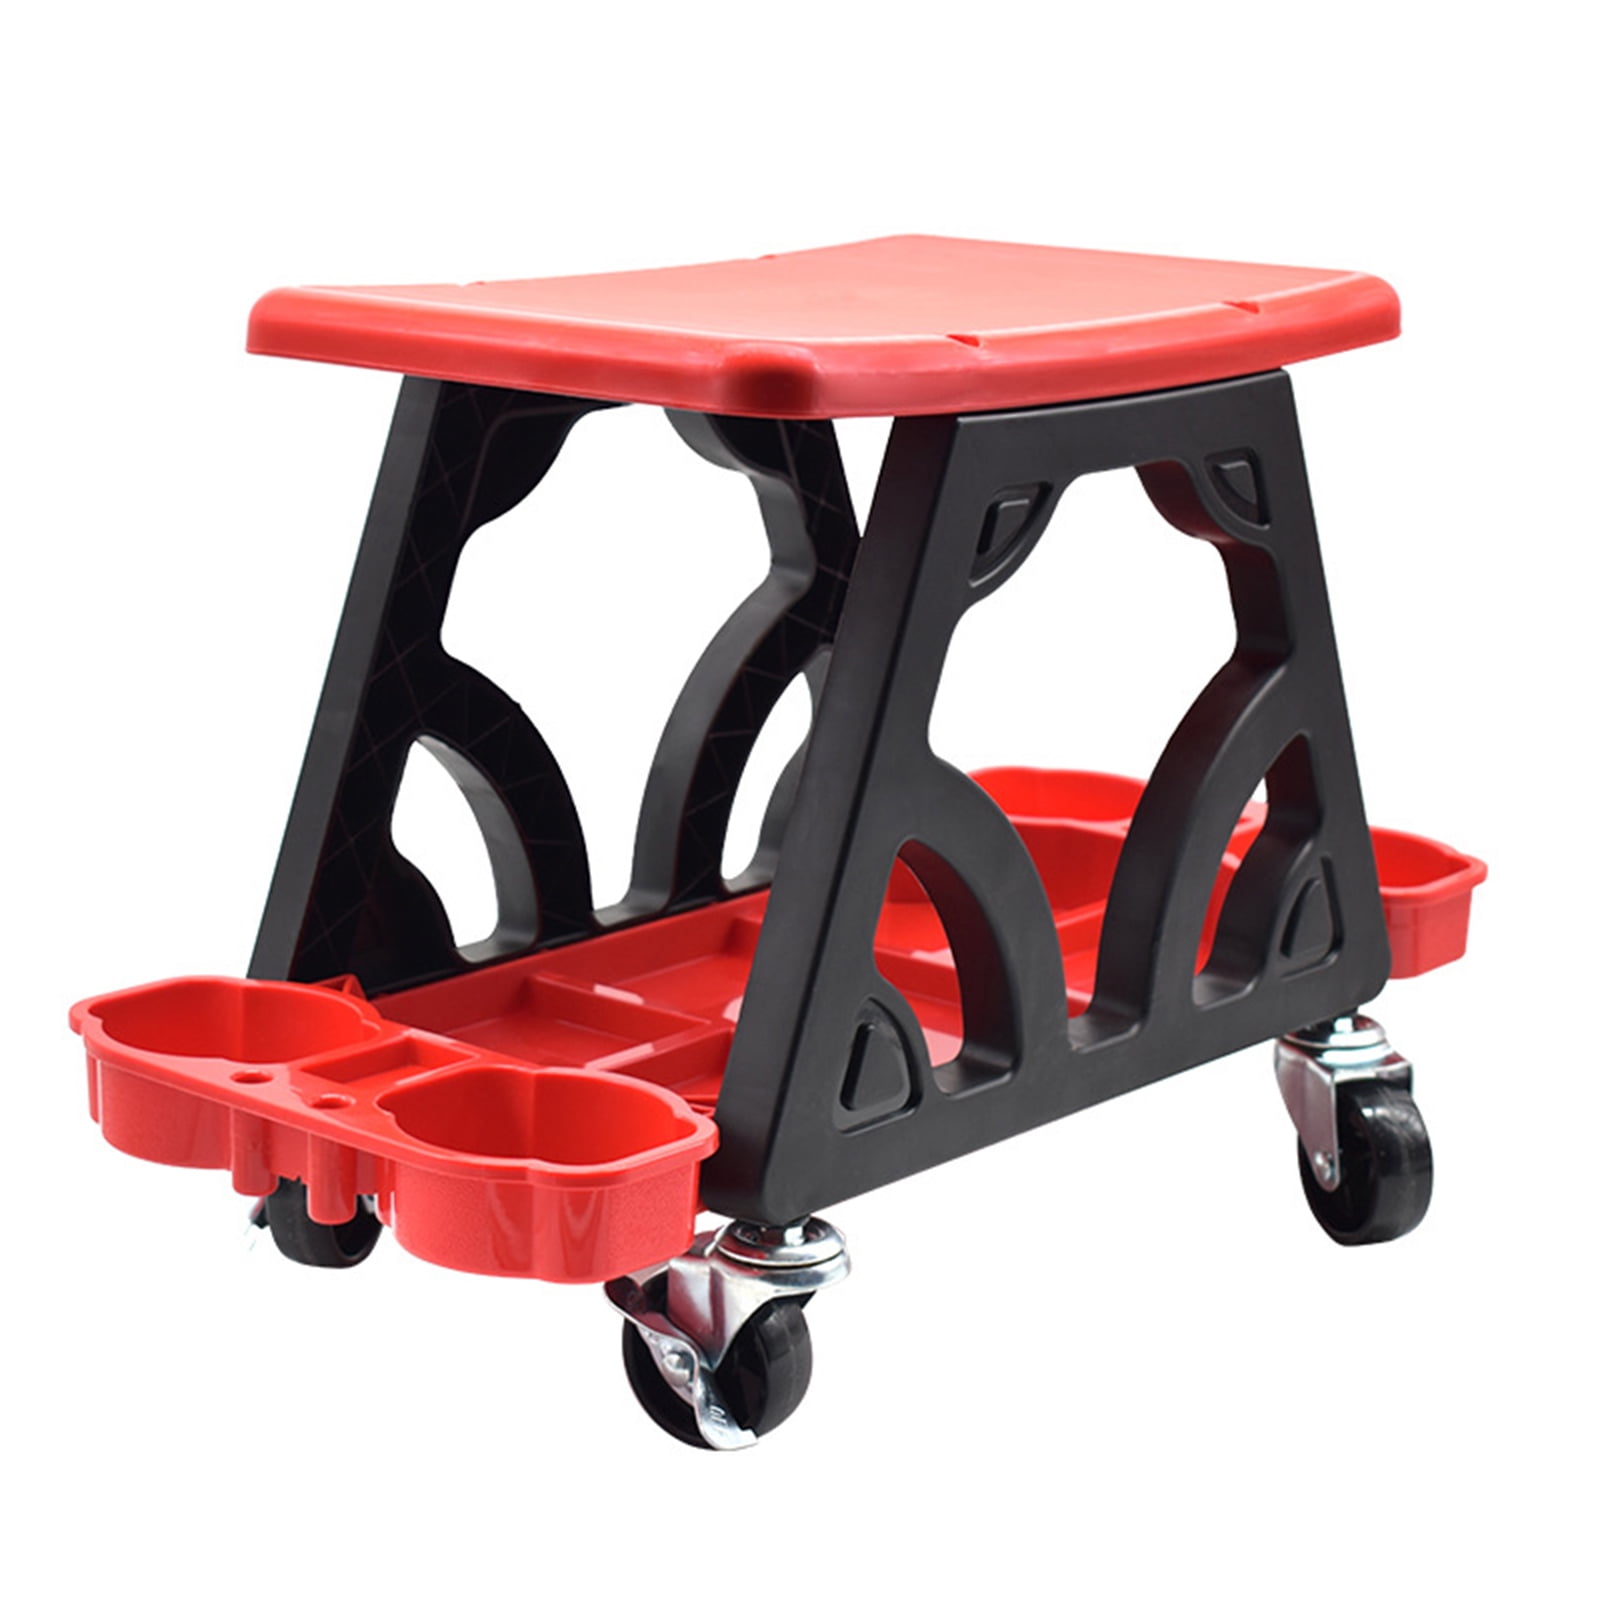 220 Lbs Capacity Rolling Mechanic Stool Garage Mobile Rolling Creeper Seat with Repair Tools Tray DIY Home Car Wash Wax Polishing Heavy Duty Detailing Seat 